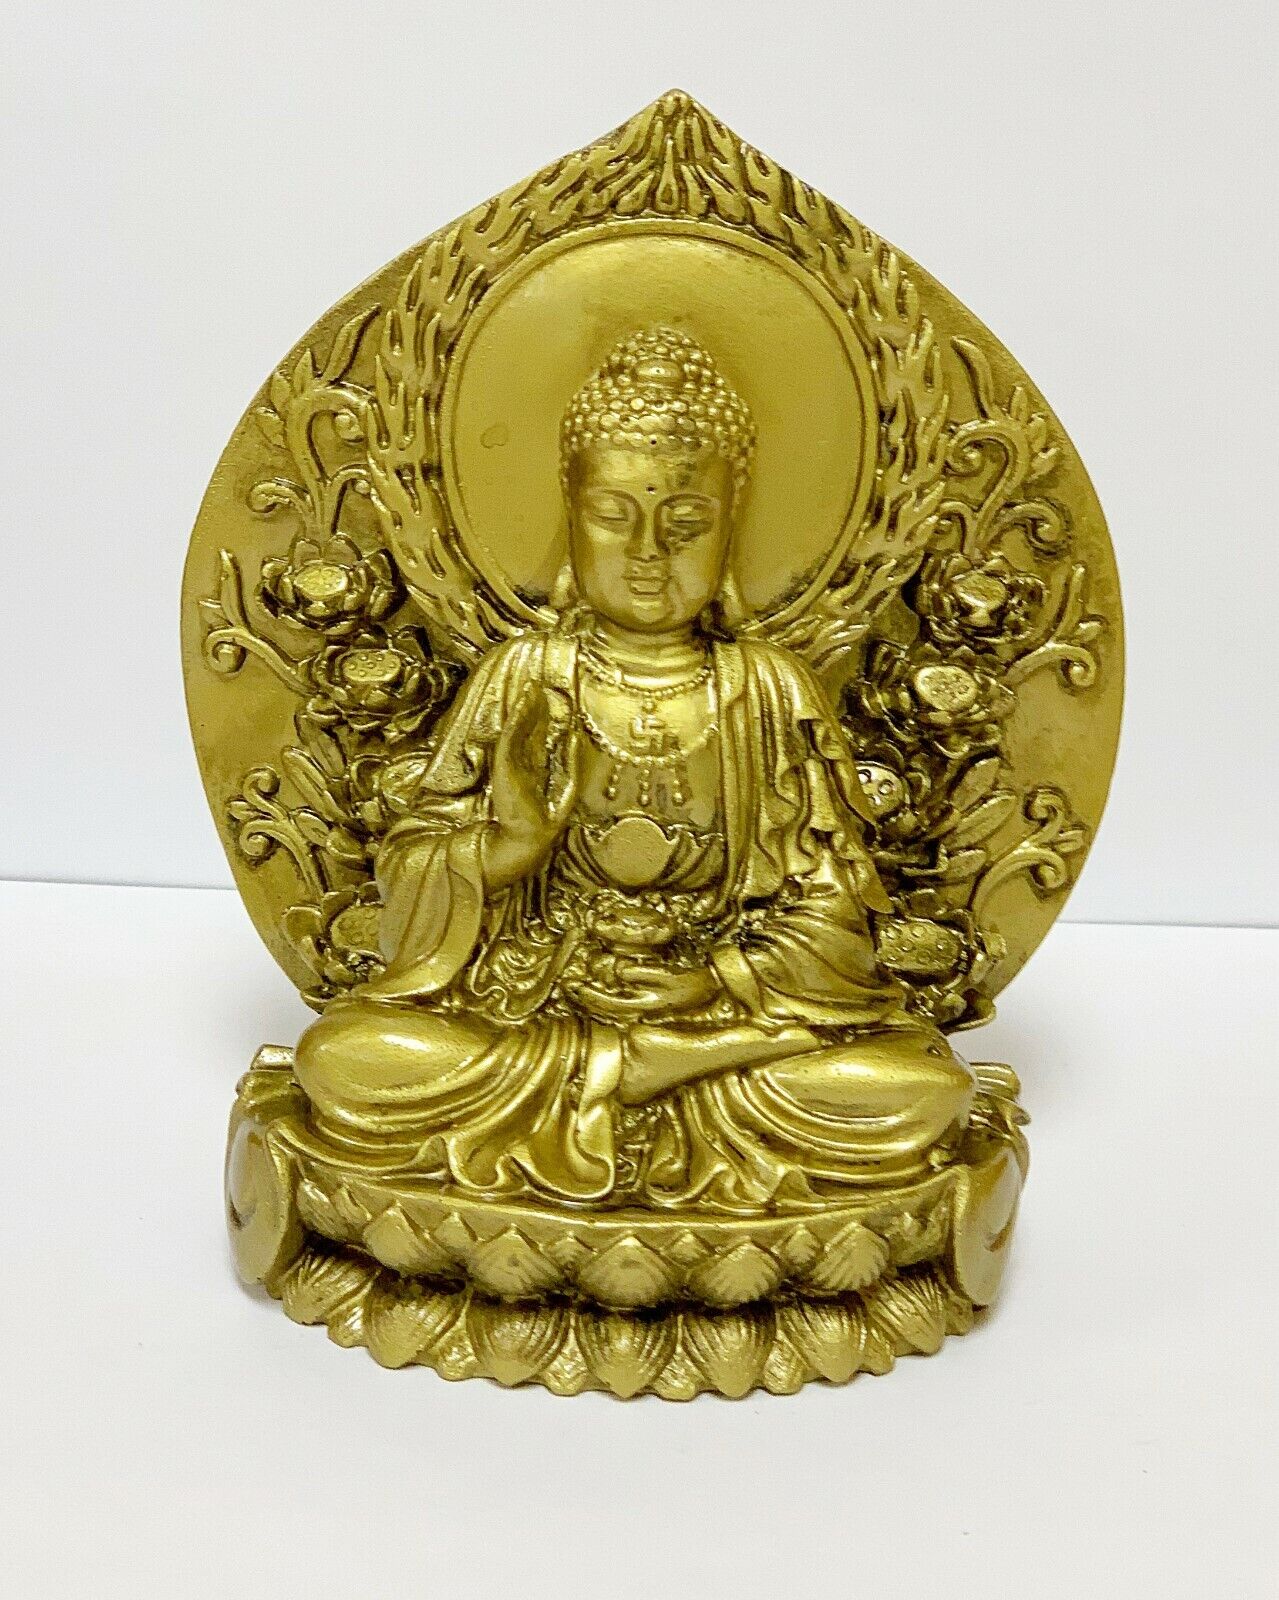 1 pc of Fengshui Statue with Guanyin Sitting on Lotus Flower